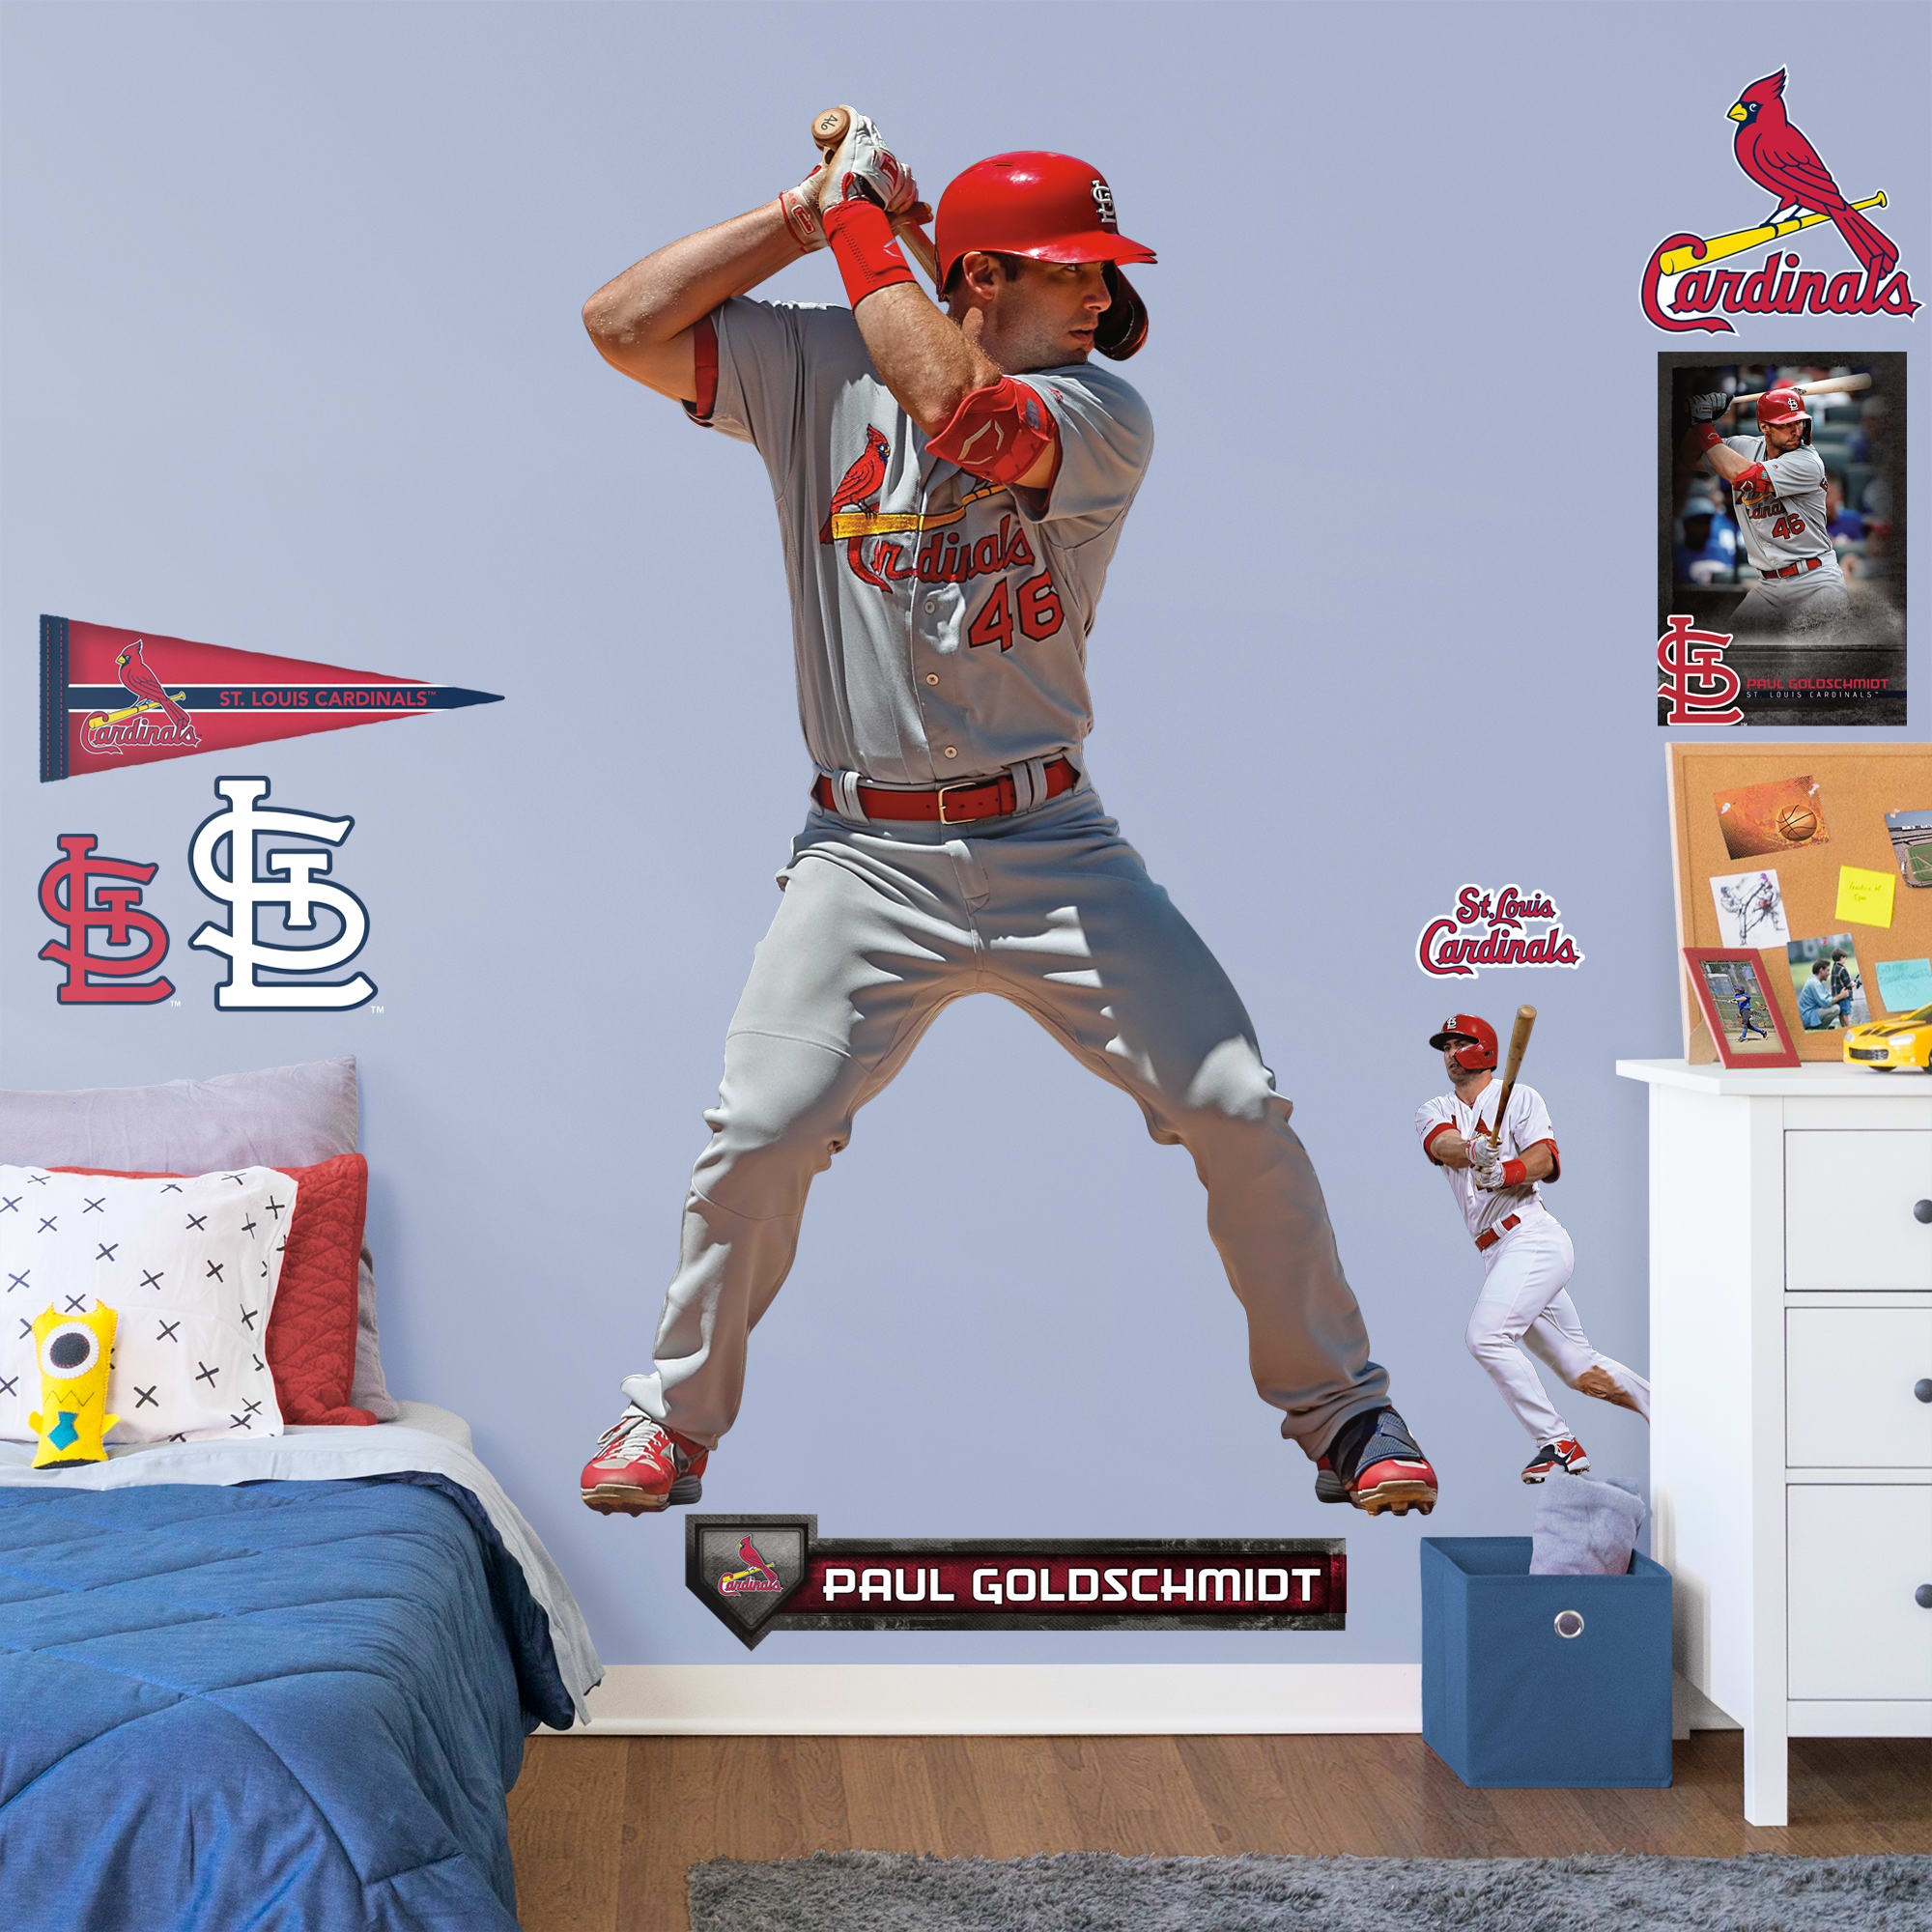 Fathead St. Louis Cardinals Giant Removable Wall Mural